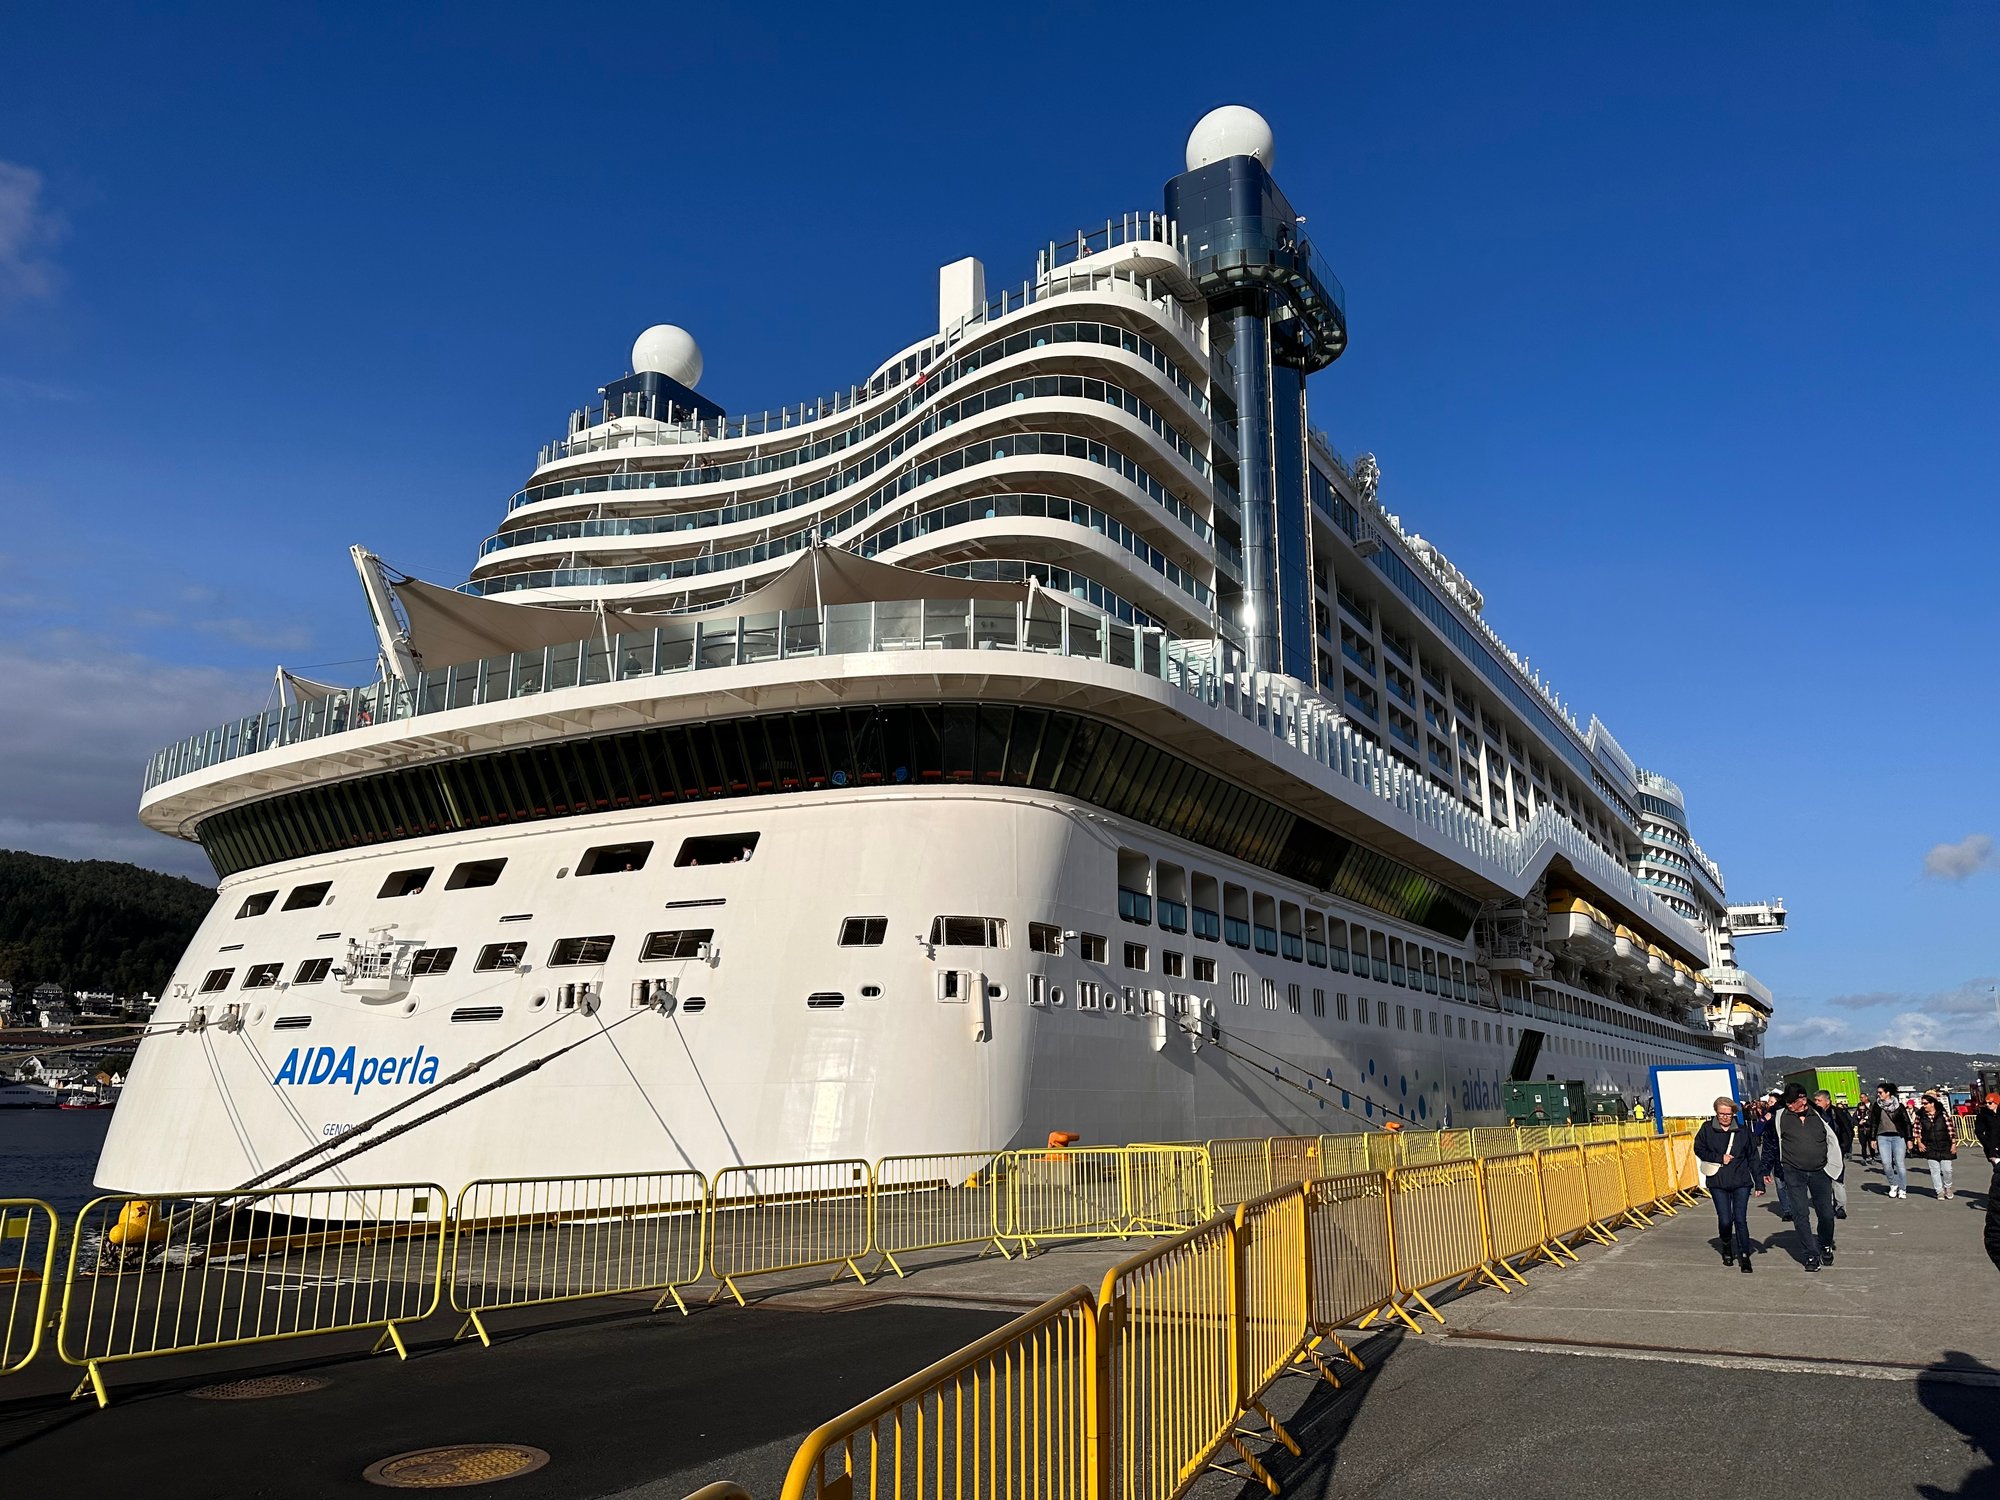 Cruise tourists are being counted for the first time